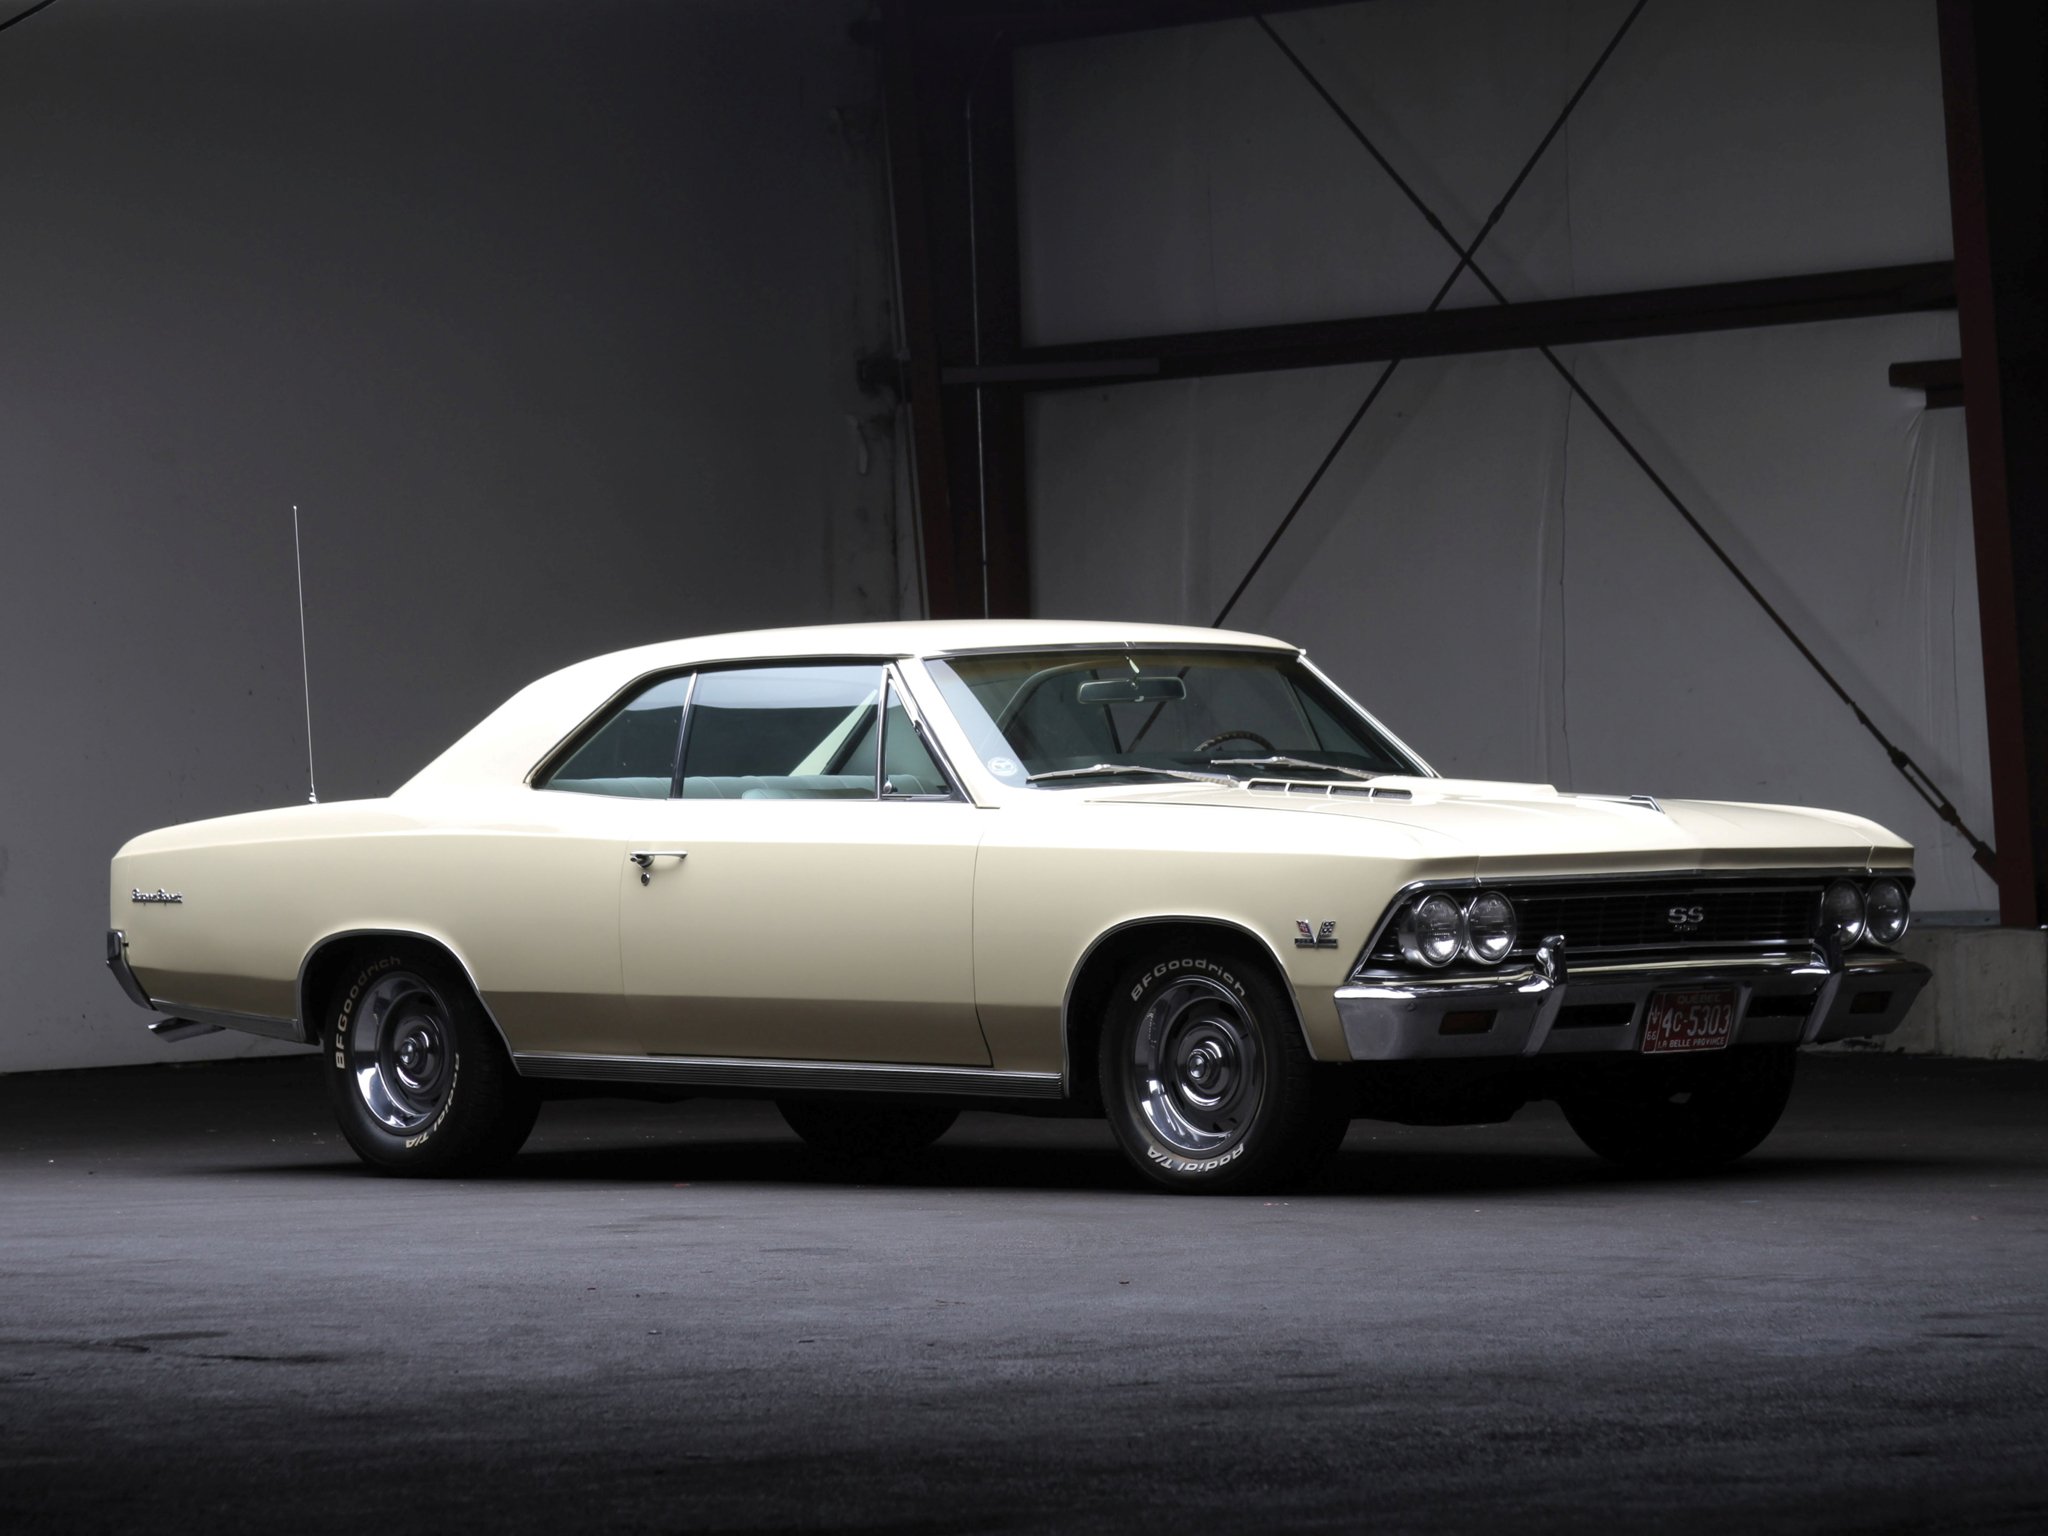 Chevelle S Hardtop Coupe Muscle Classic H Wallpaper Background